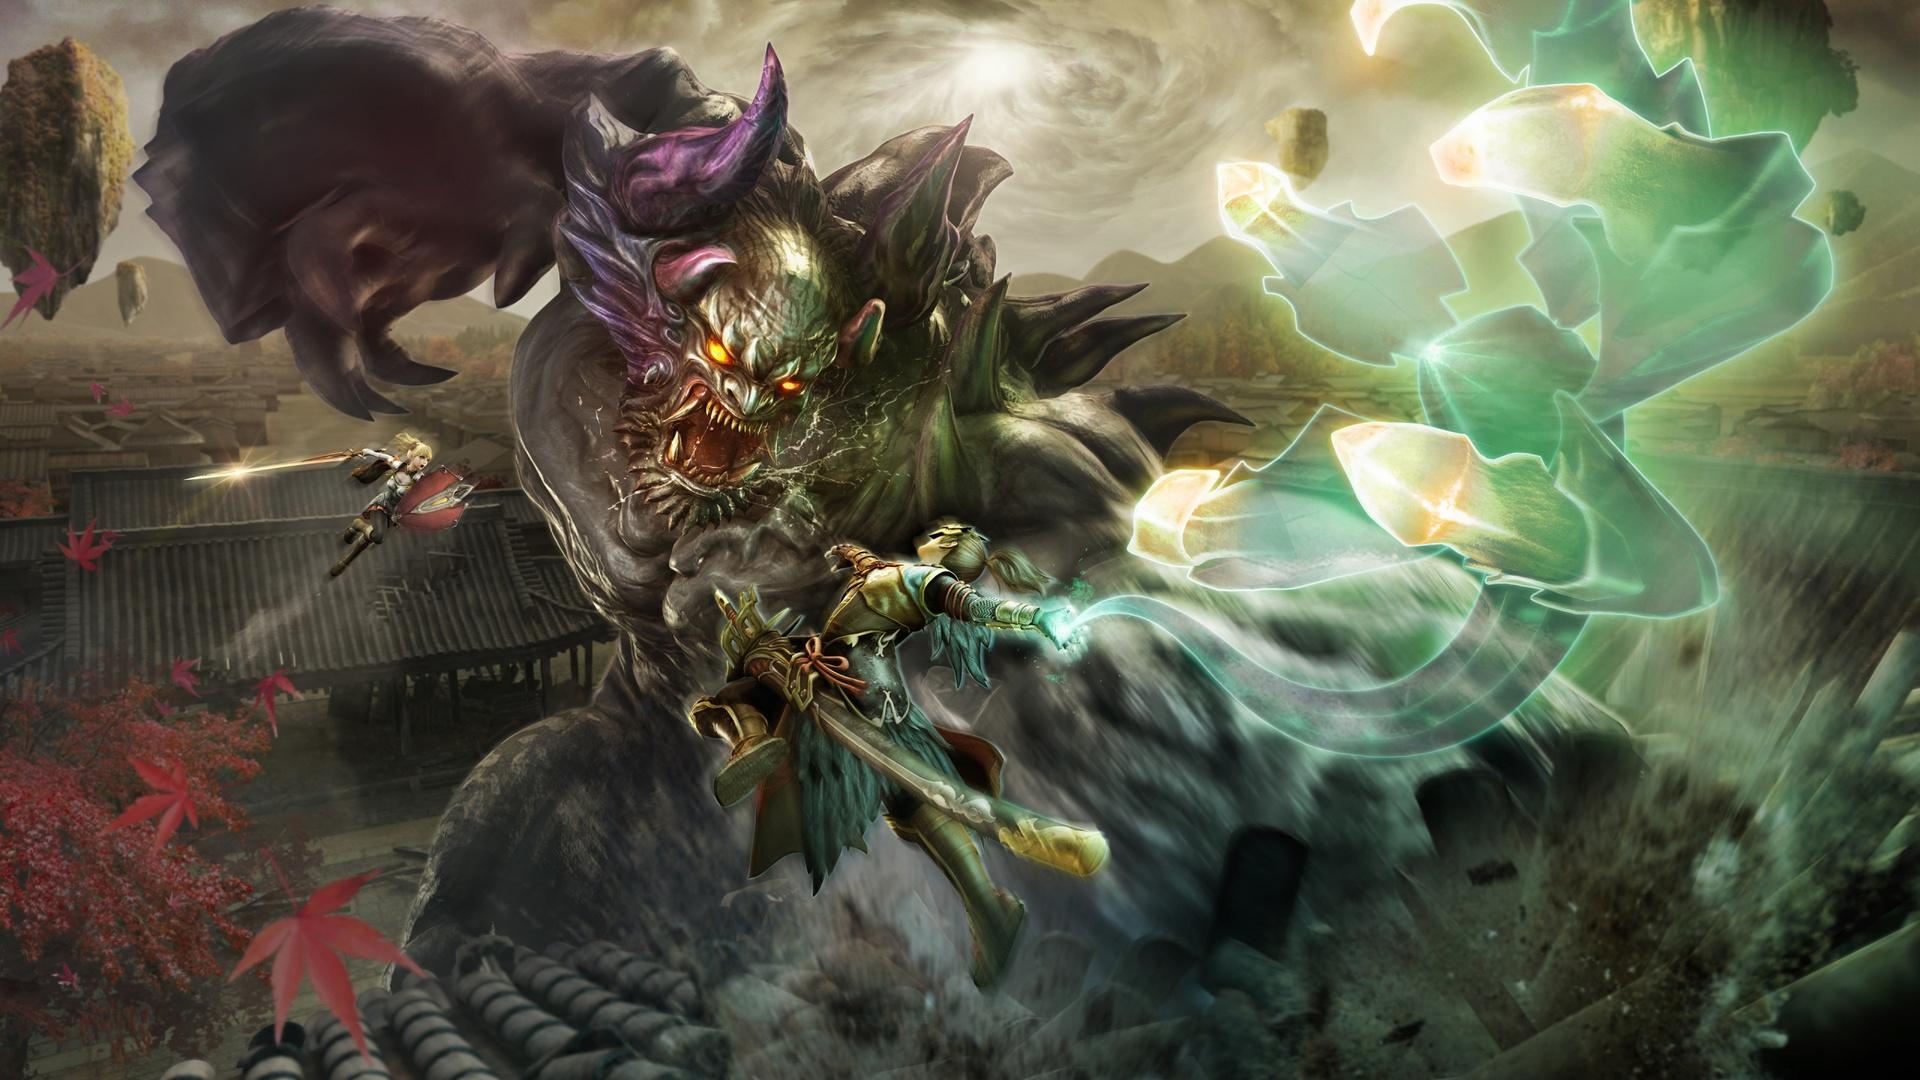 Slayer vs demon Wallpapers from Toukiden 2